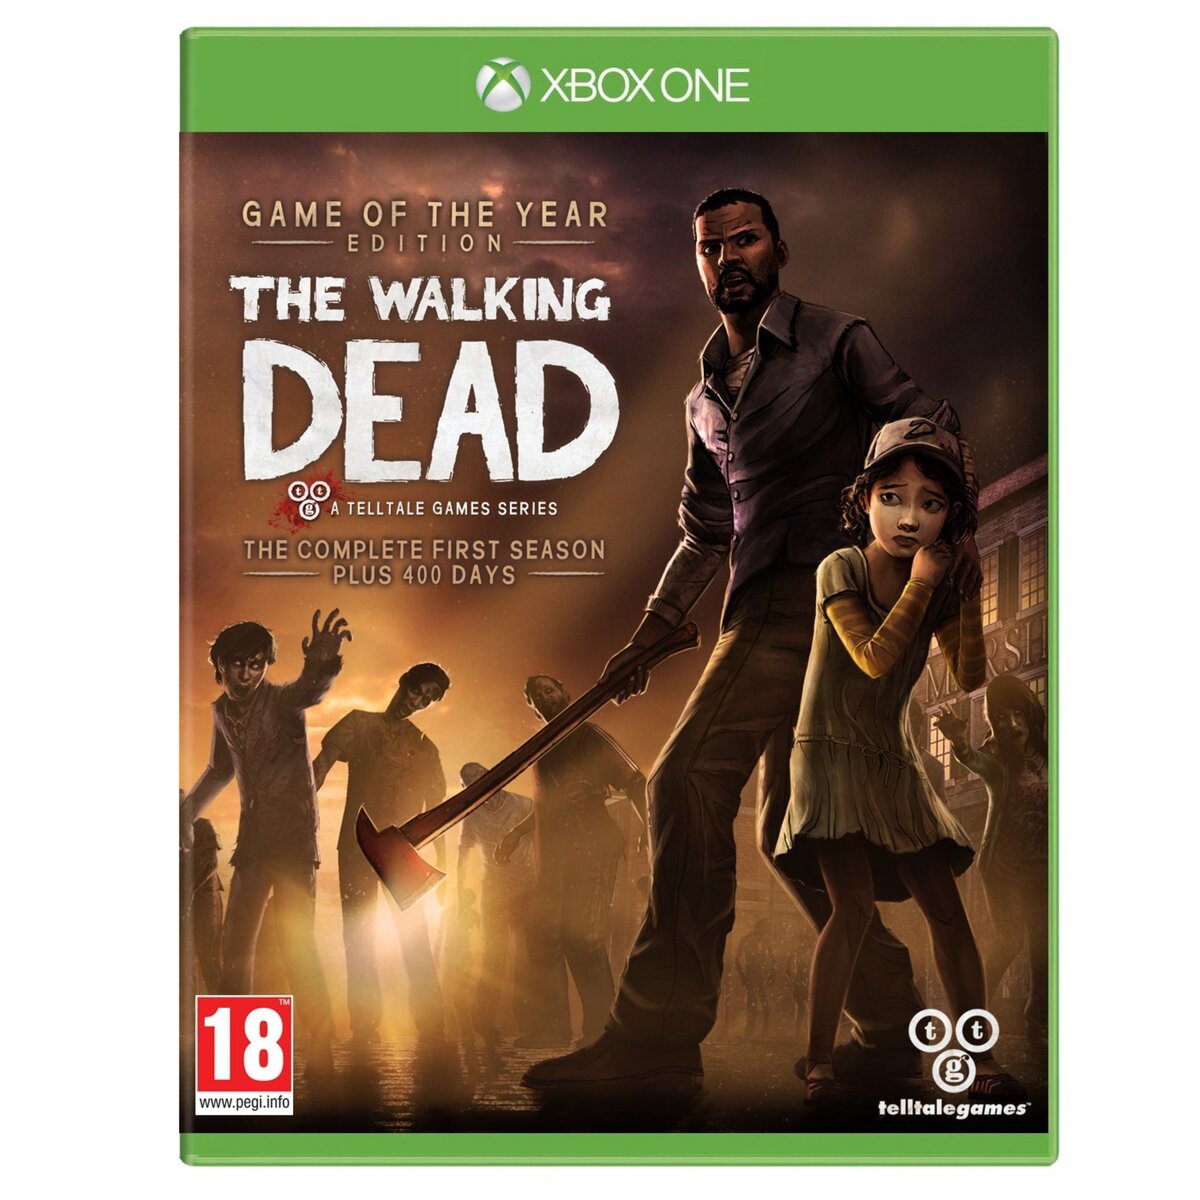 The Walking Dead - Game of the Year Xbox One